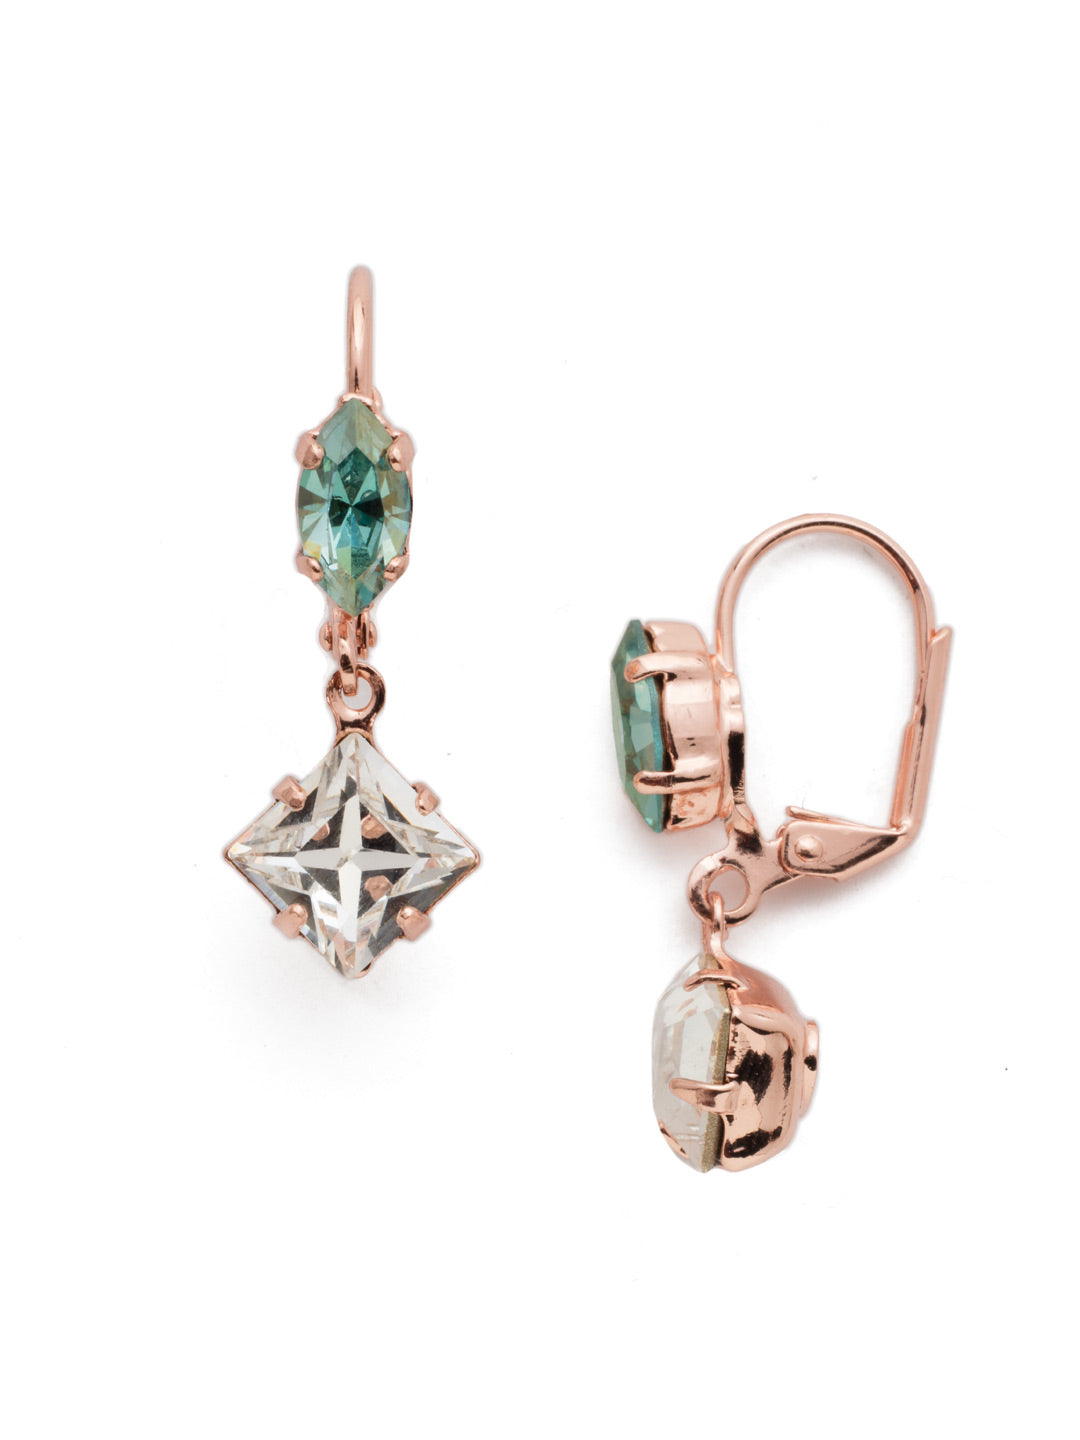 Malia Dangle Earrings - EEP16RGCAZ - The Malia French Wire Dangle Earring pairs a simple navette and diamond-shaped crystal for a perfectly pretty coupling. From Sorrelli's Crystal Azure collection in our Rose Gold-tone finish.